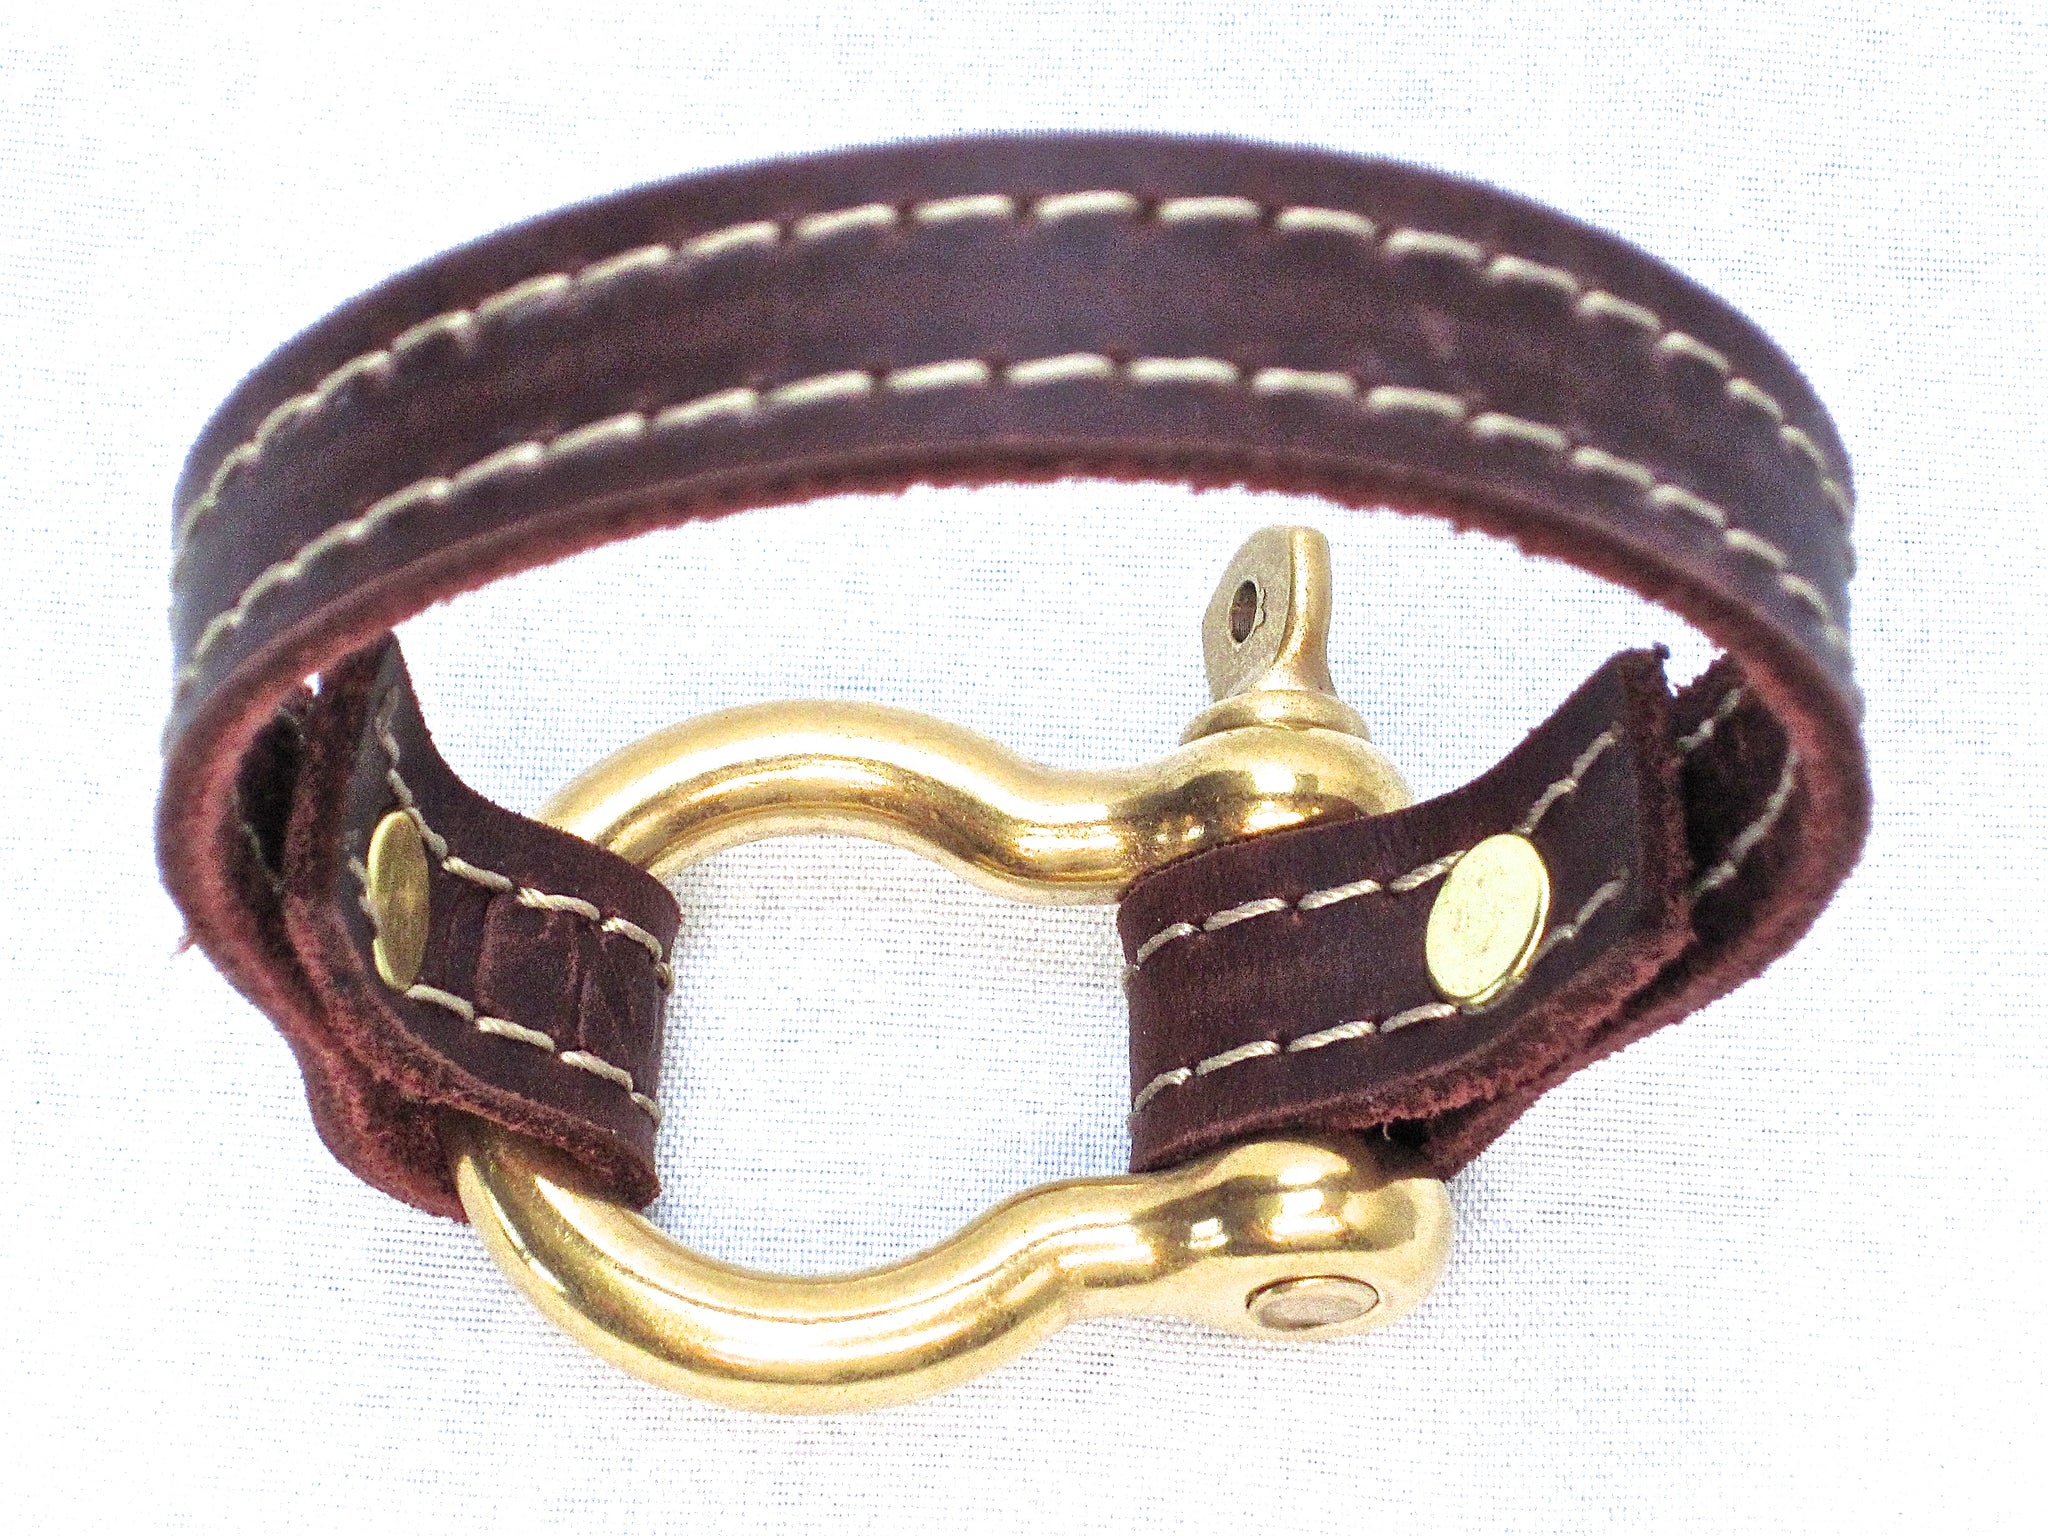 Nyet jewelry Signature Gold Bracelet Brown by nyet jewelry